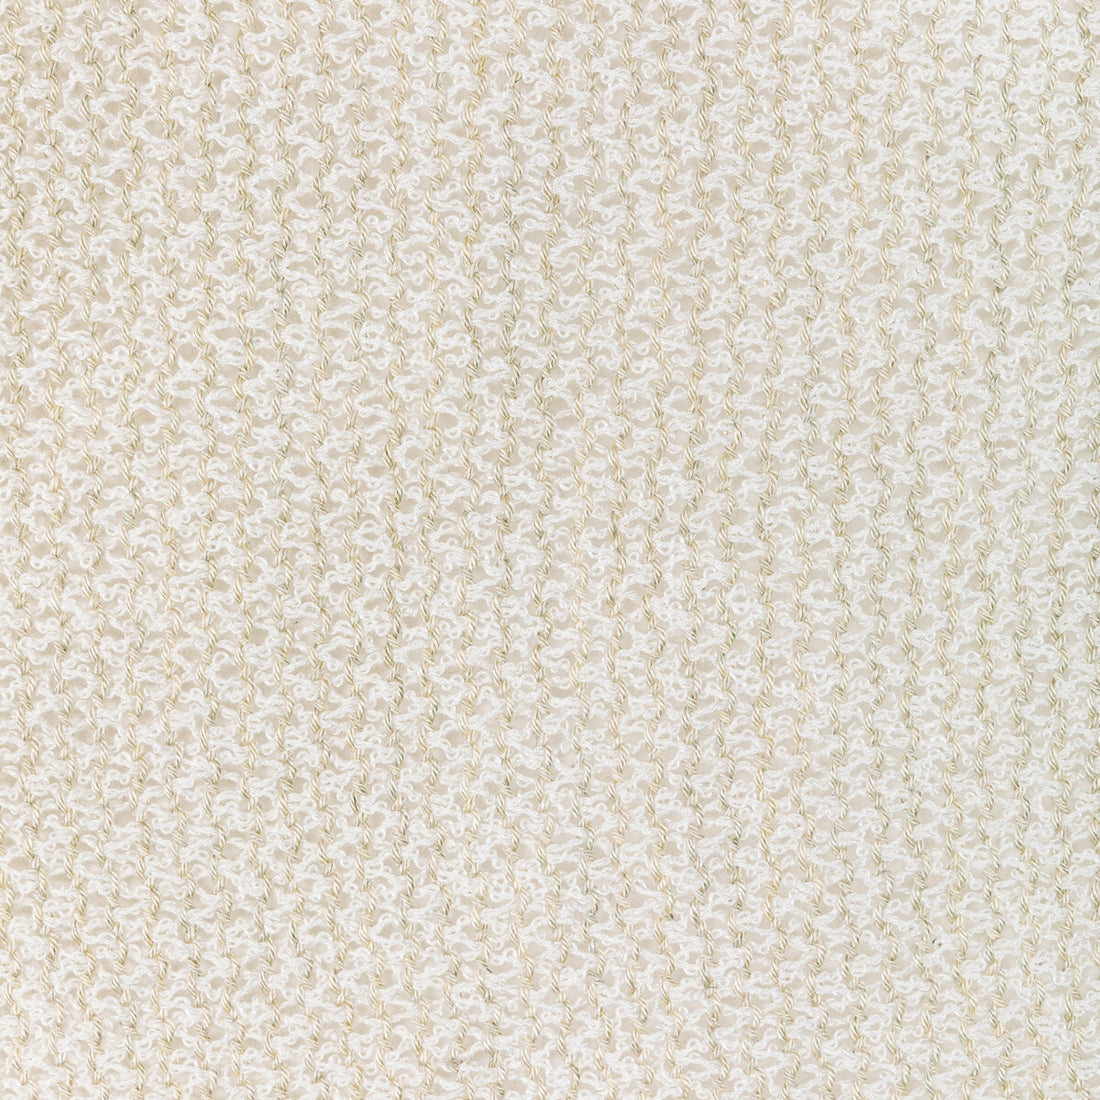 Pebbly fabric in chalk color - pattern 4897.16.0 - by Kravet Couture in the Barbara Barry Ojai collection